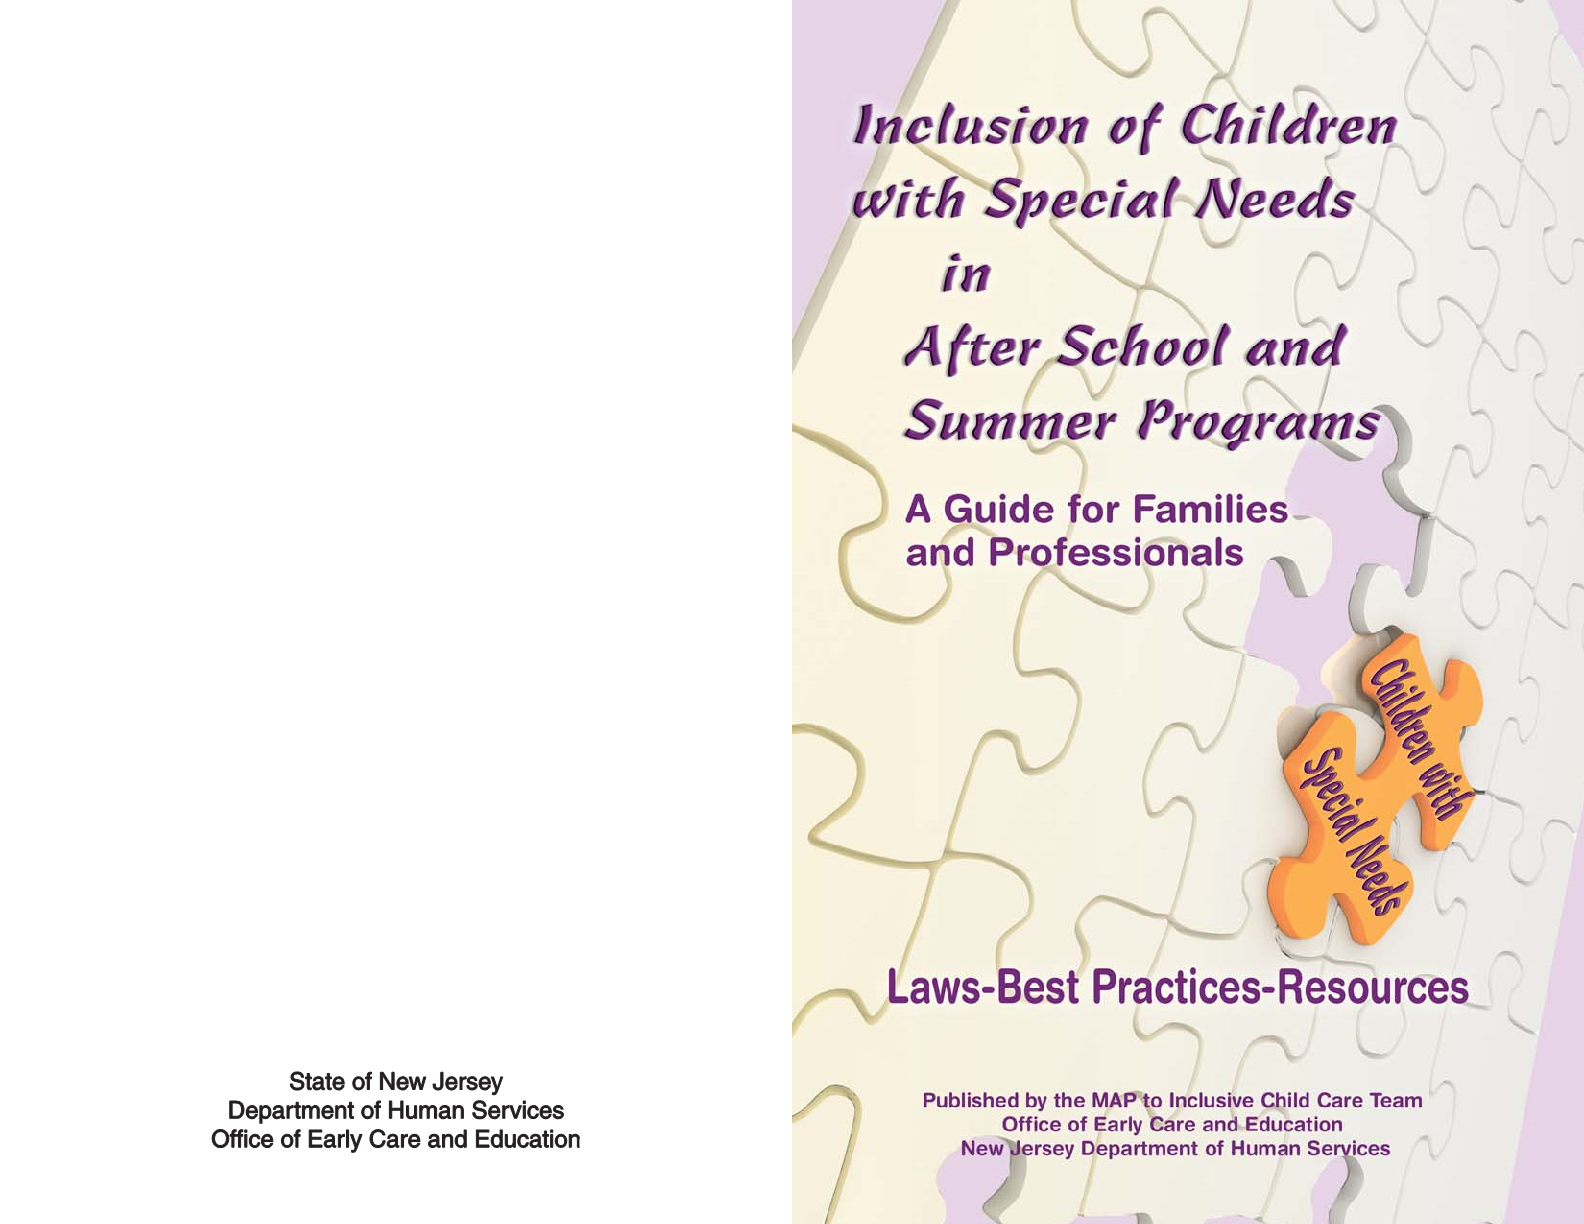 Inclusion of Children with Special Needs in After School & Summer Programs Resource Guide